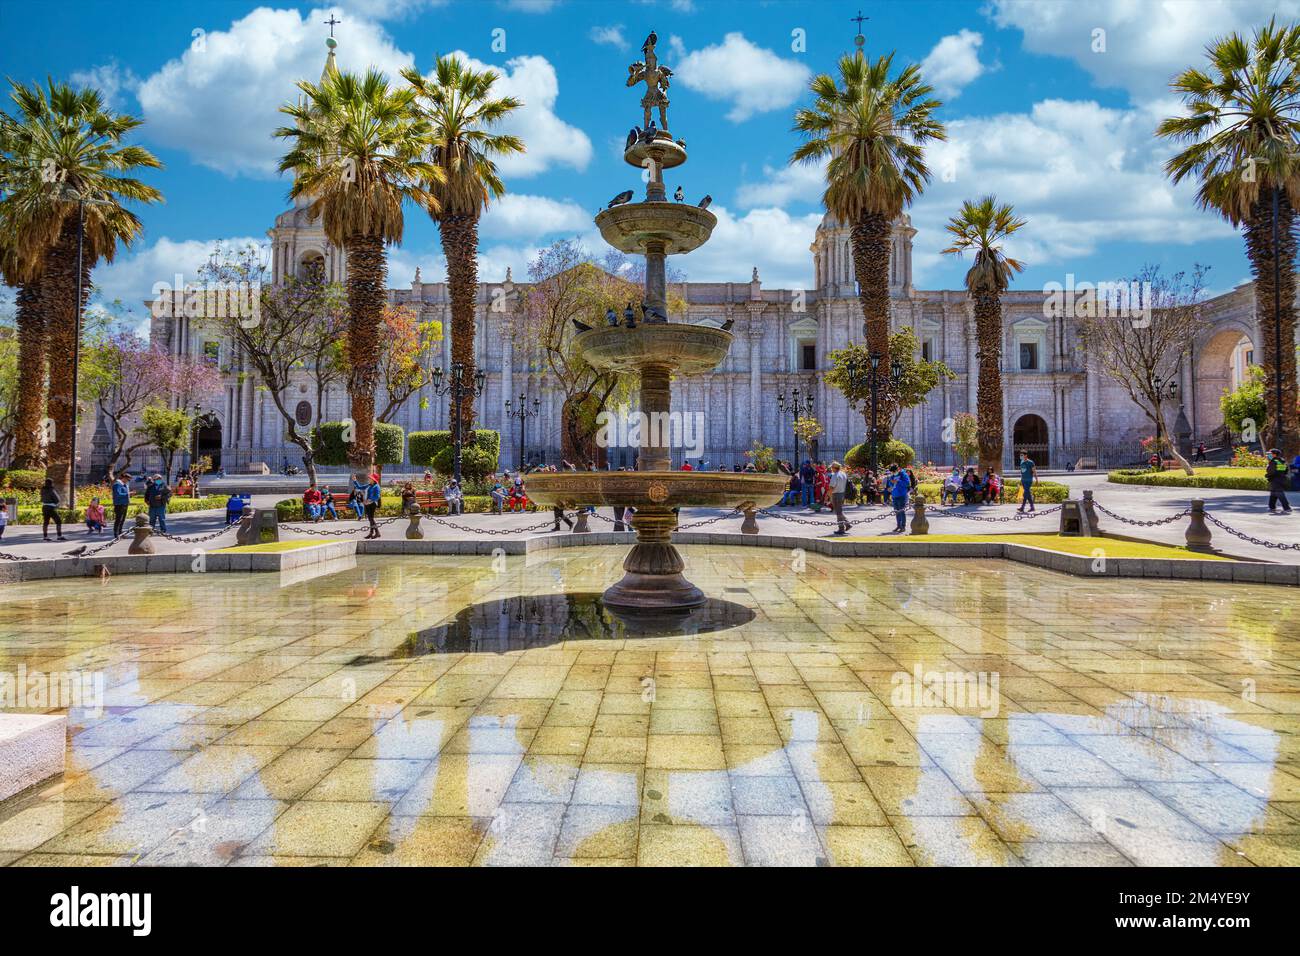 The Plaza de Armas in Arequipa, Peru with the Cathedral and the fountain. Stock Photo